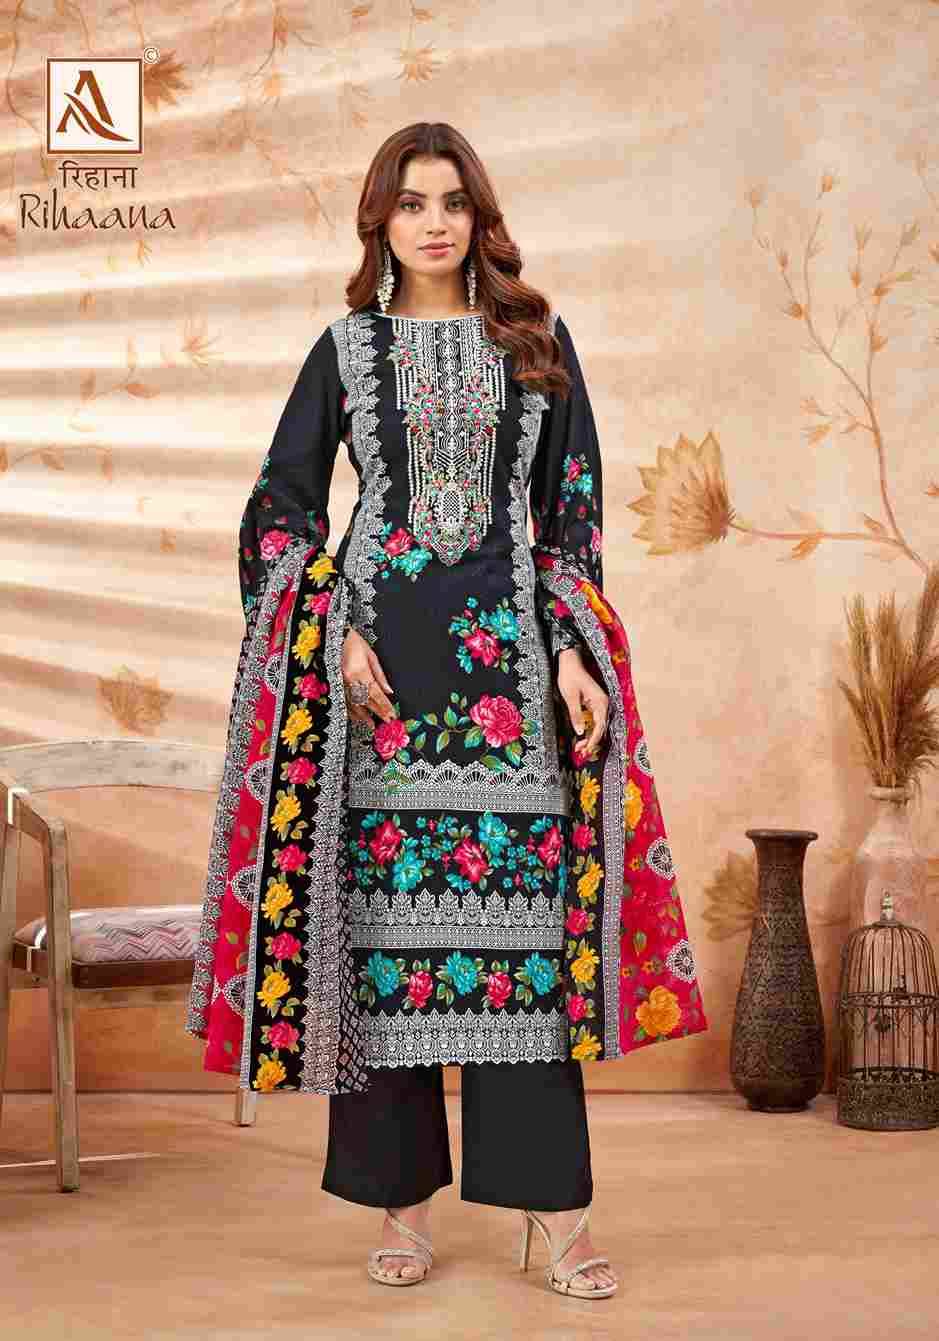 Rihaana By Alok Suit 1533-001 To 1533-008 Series Beautiful Festive Suits Stylish Fancy Colorful Casual Wear & Ethnic Wear Pure Cambric Cotton Print Dresses At Wholesale Price